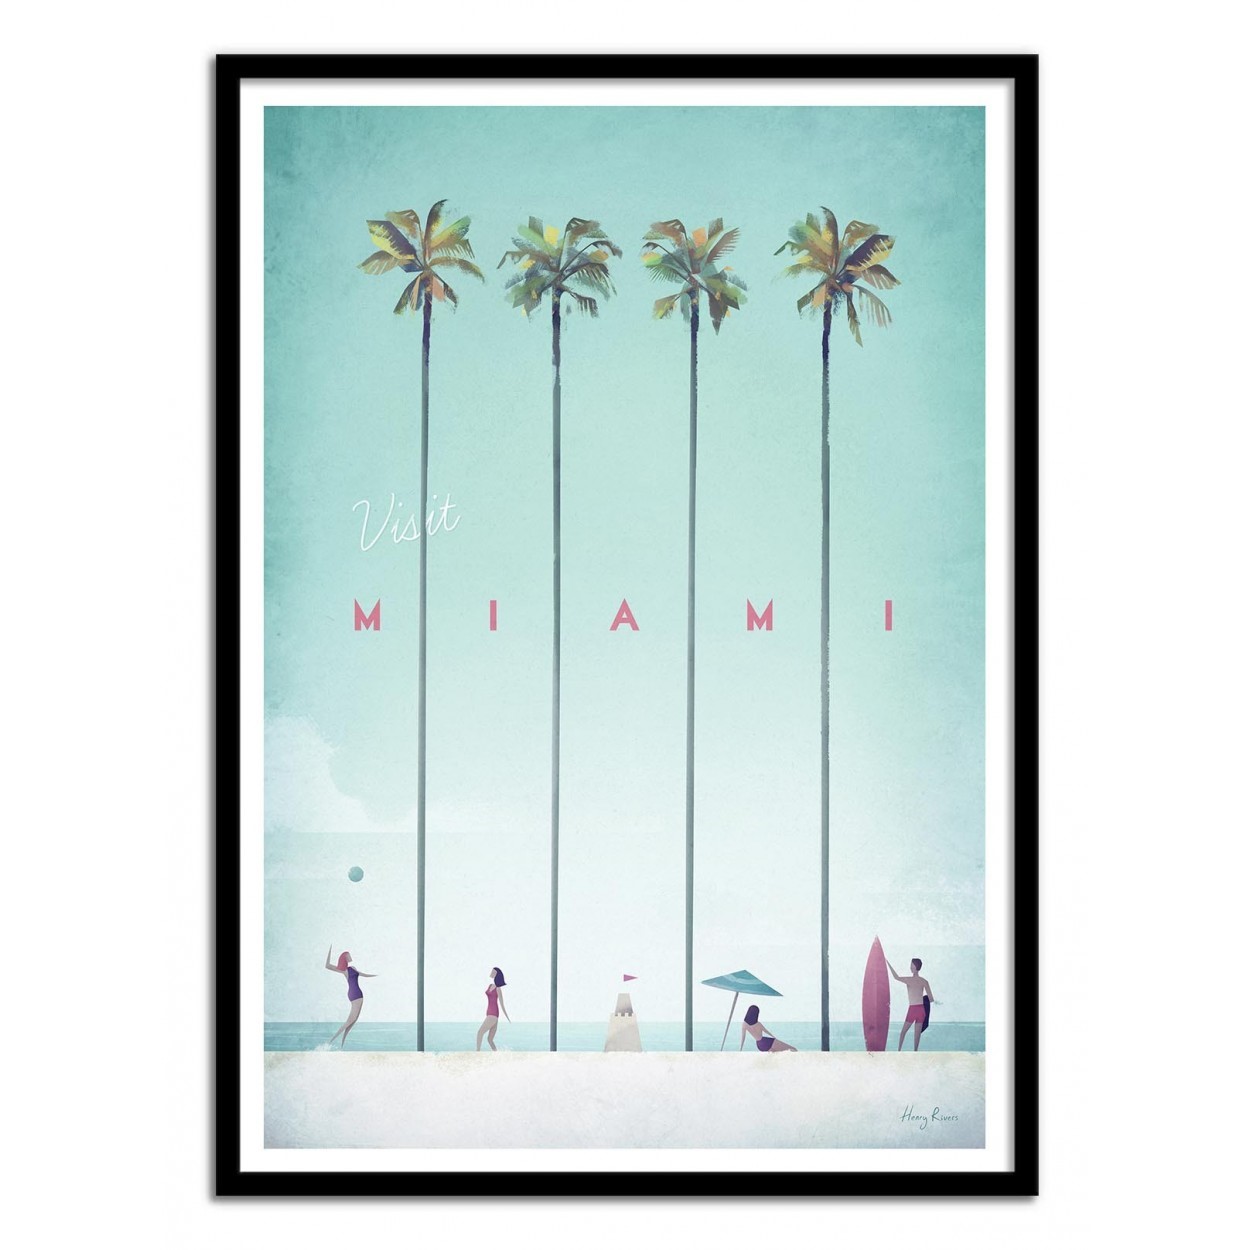 A poster of Miami.